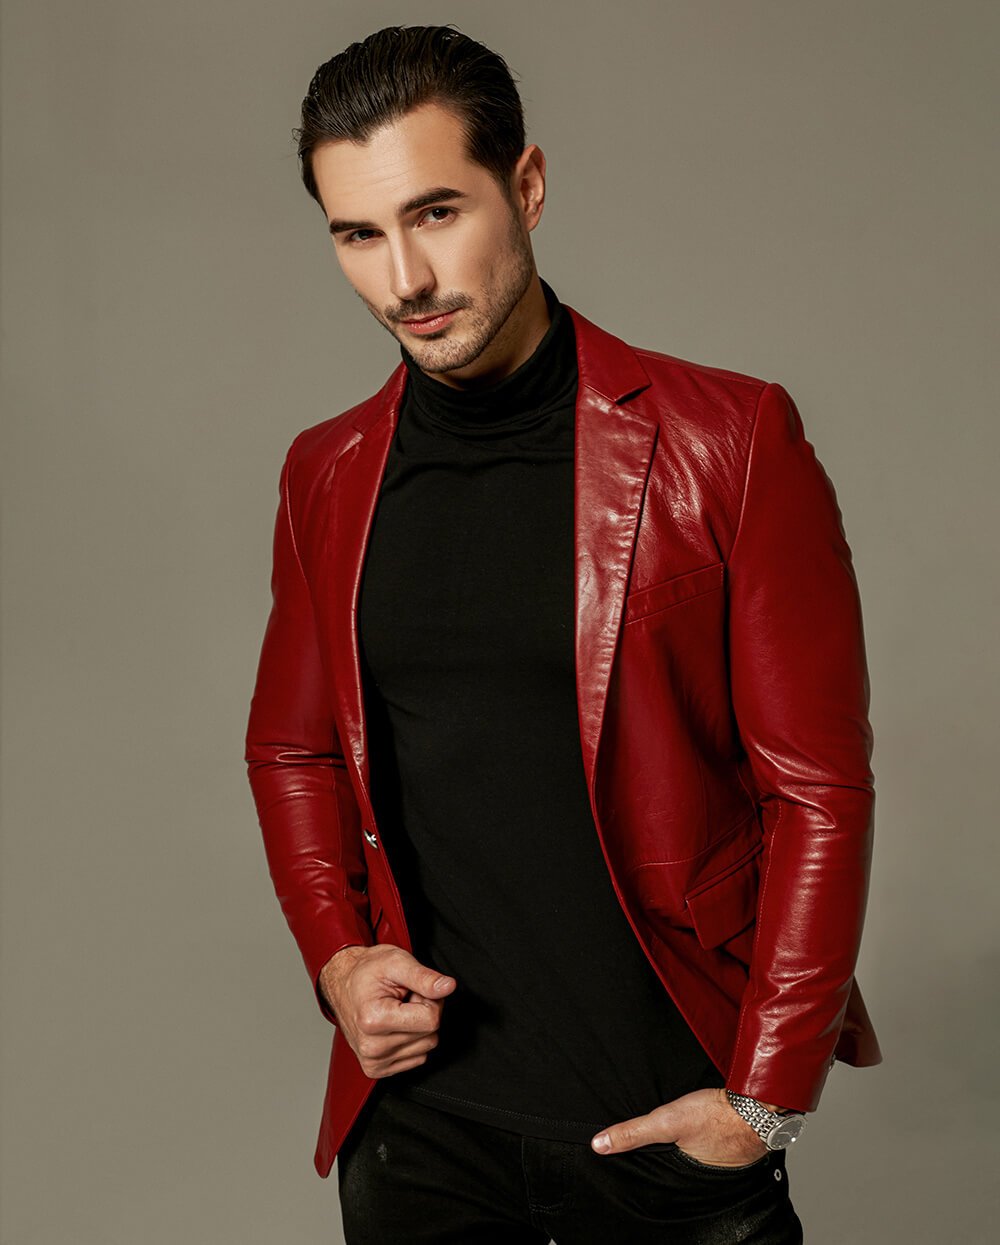 Men's Red Leather Jackets and Coats ...